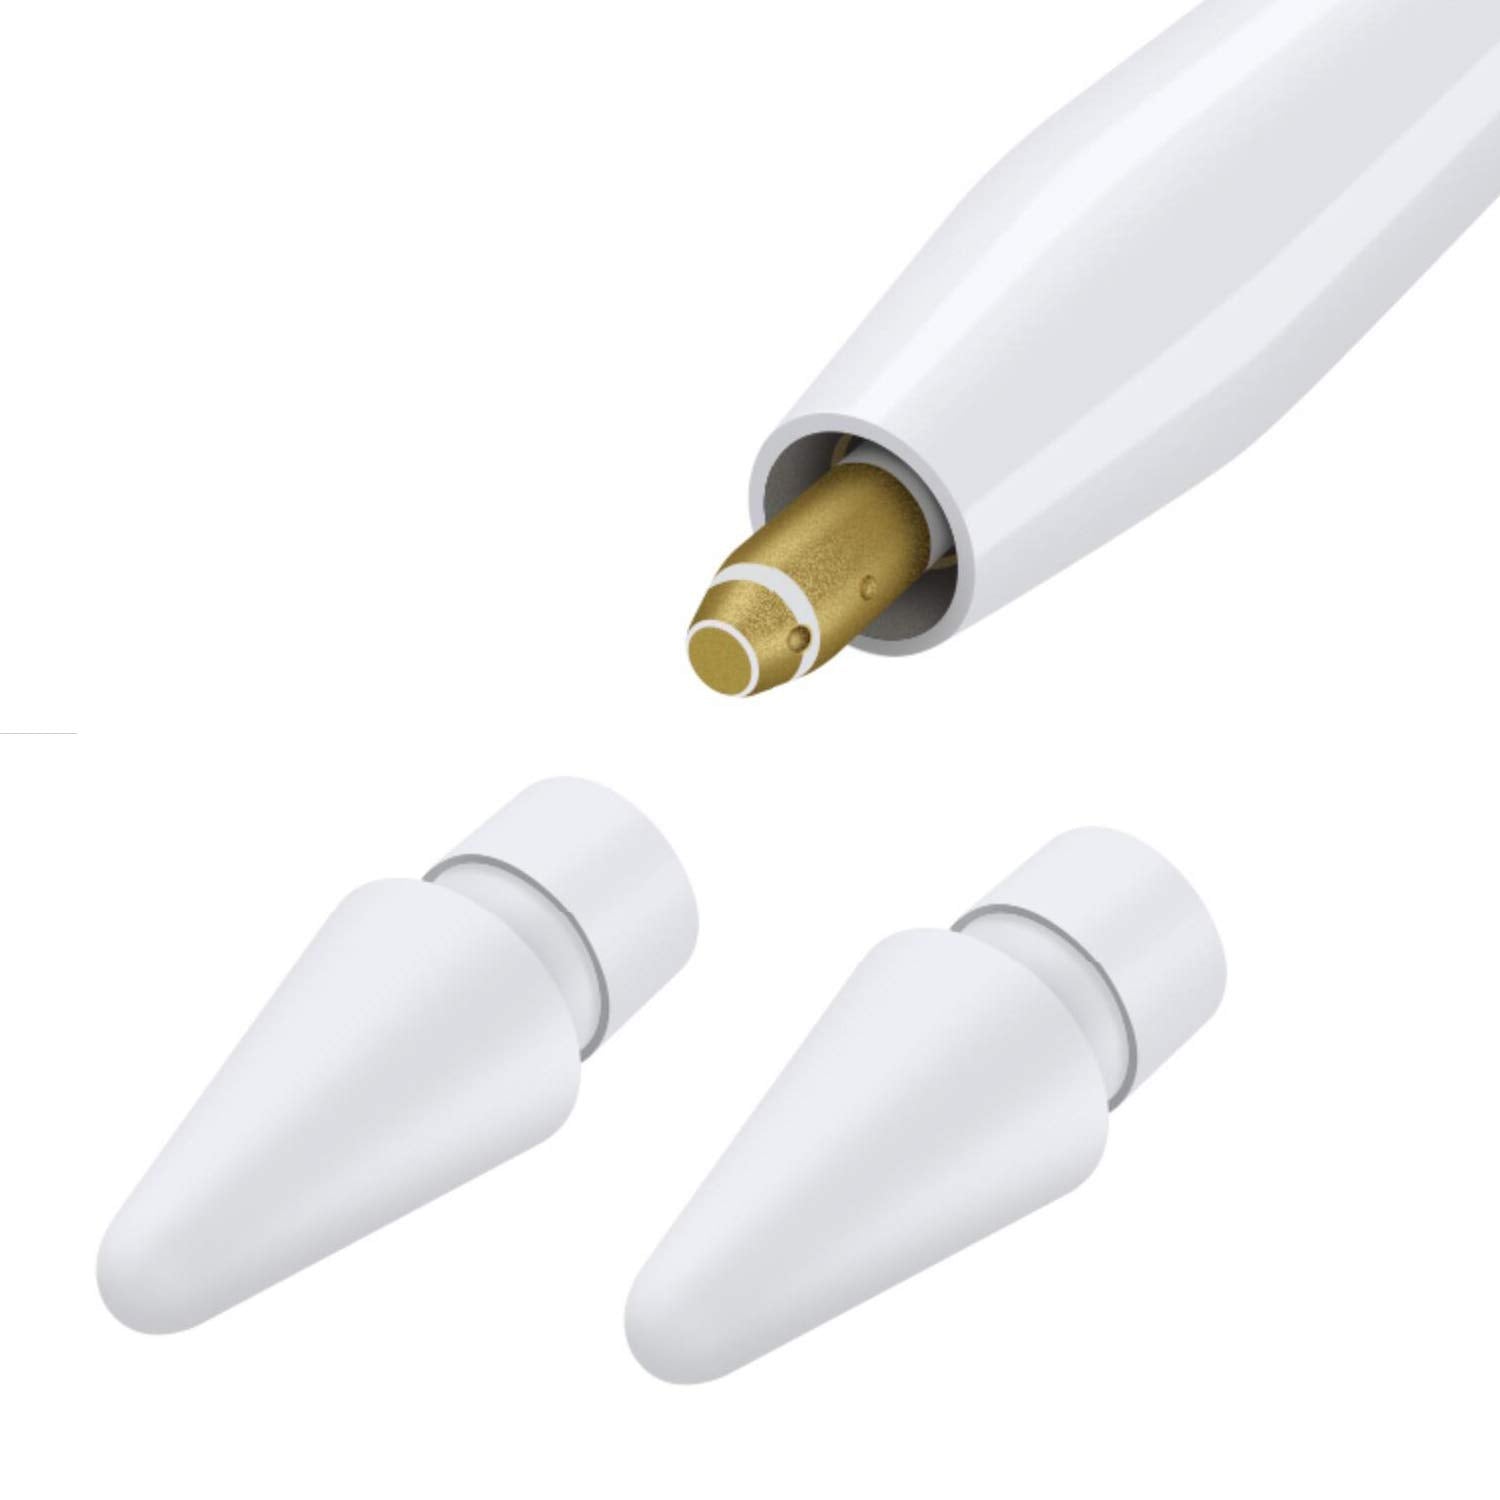 Replacement Tips Compatible with Apple Pencil 2 Gen iPad Pro Pencil - Apple Pencil iPencil Nib for iPad Apple Pencil 1 st/Pencil 2 Gen White 2 Pack